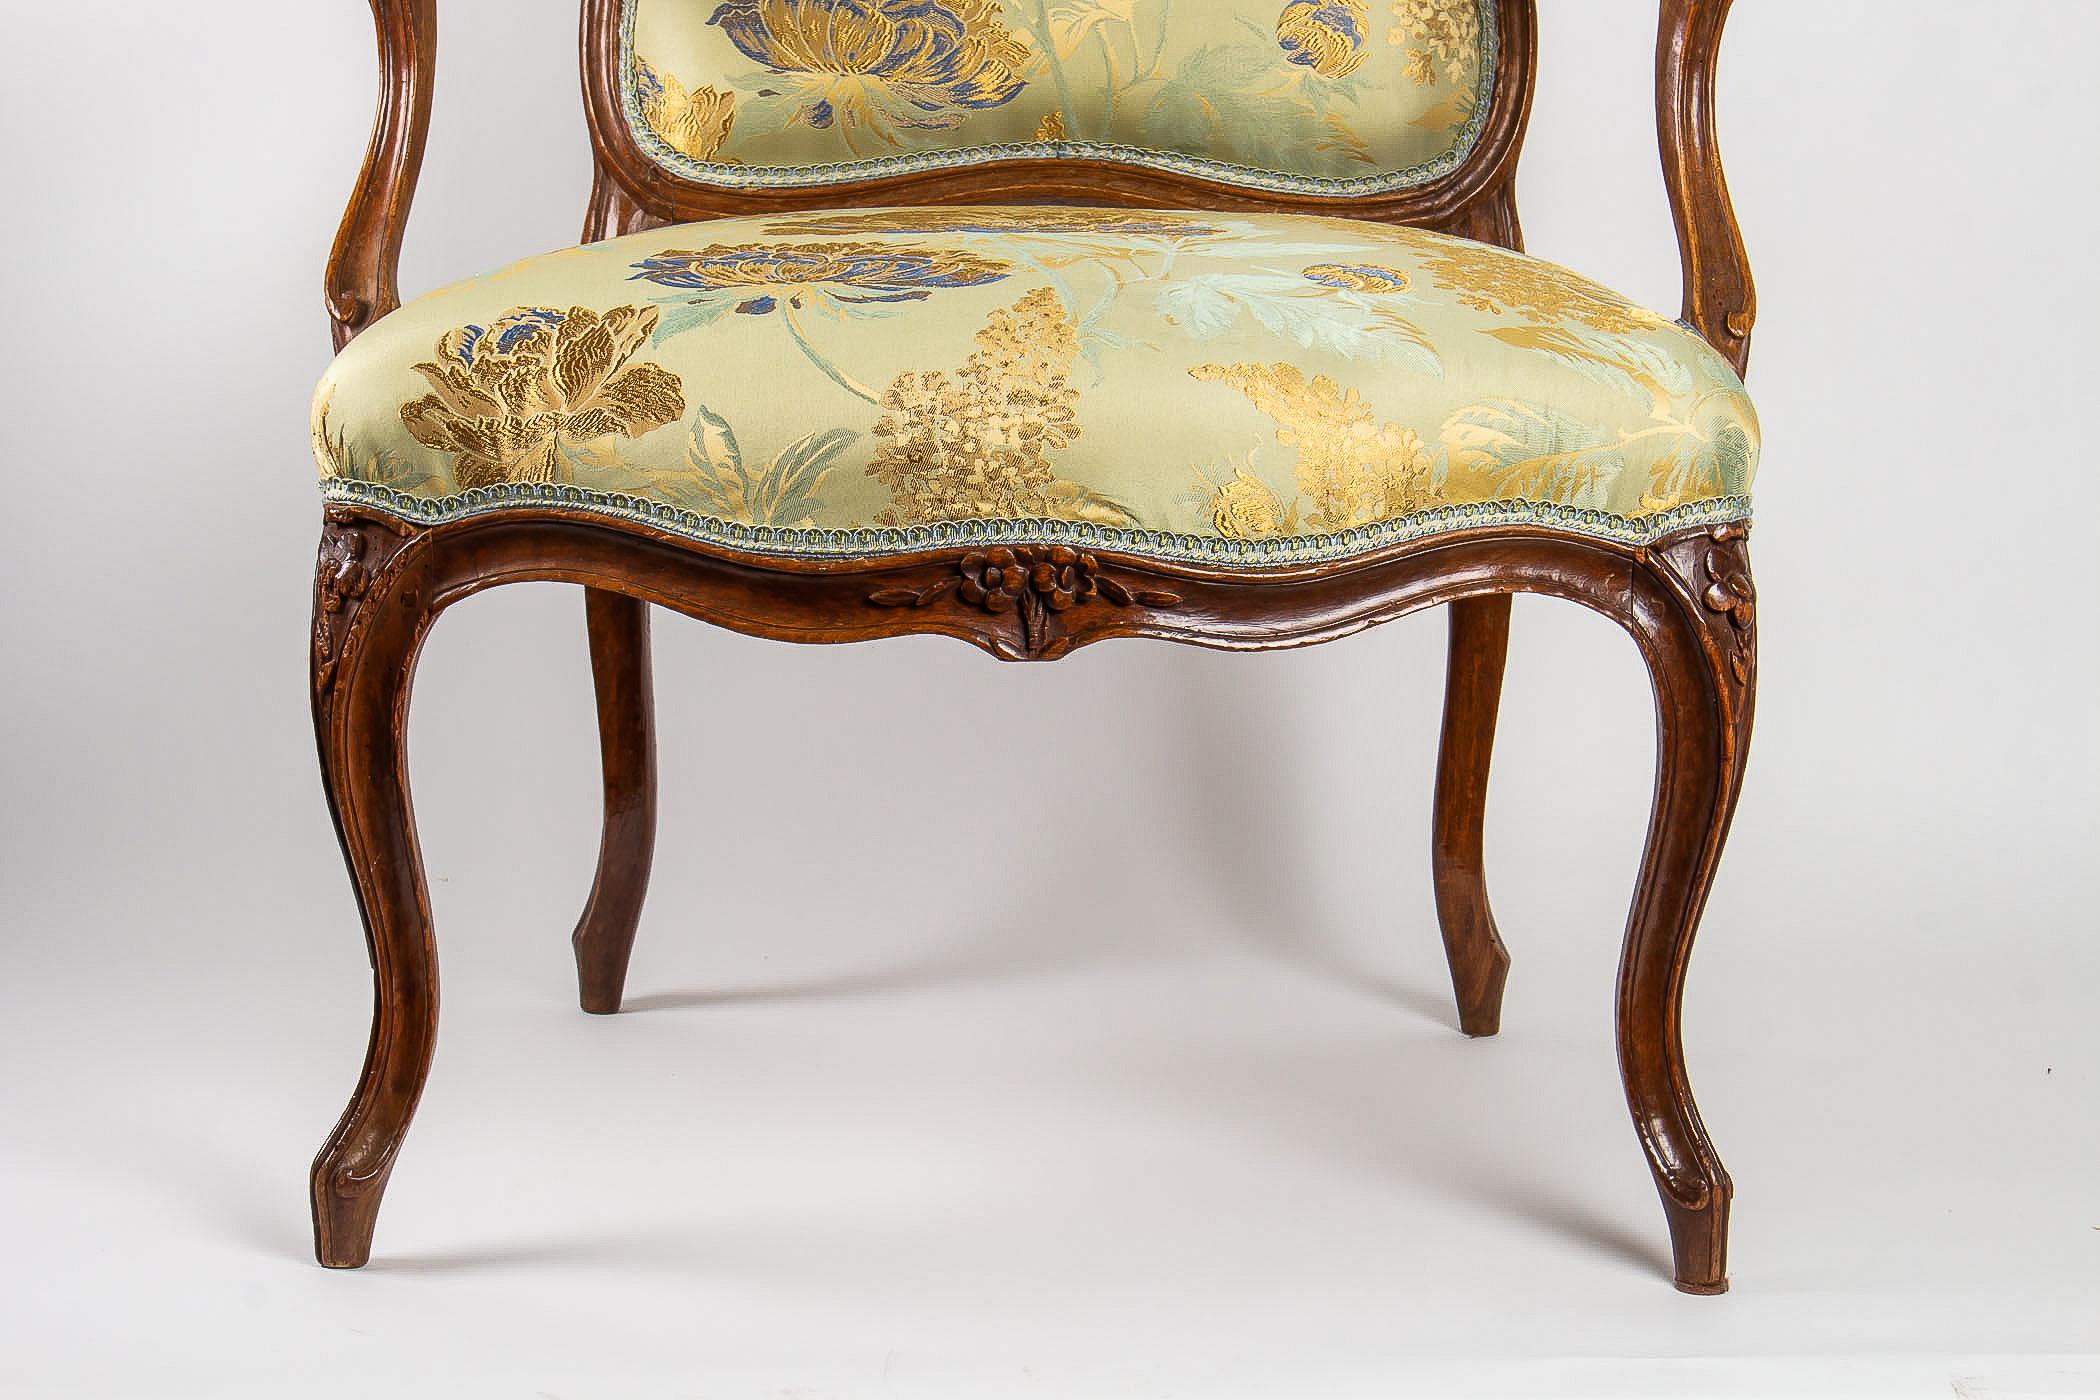 Fruitwood Louis XV Period Set of 4 of Large Armchairs, circa 1766-1770 by Louis Delanois For Sale